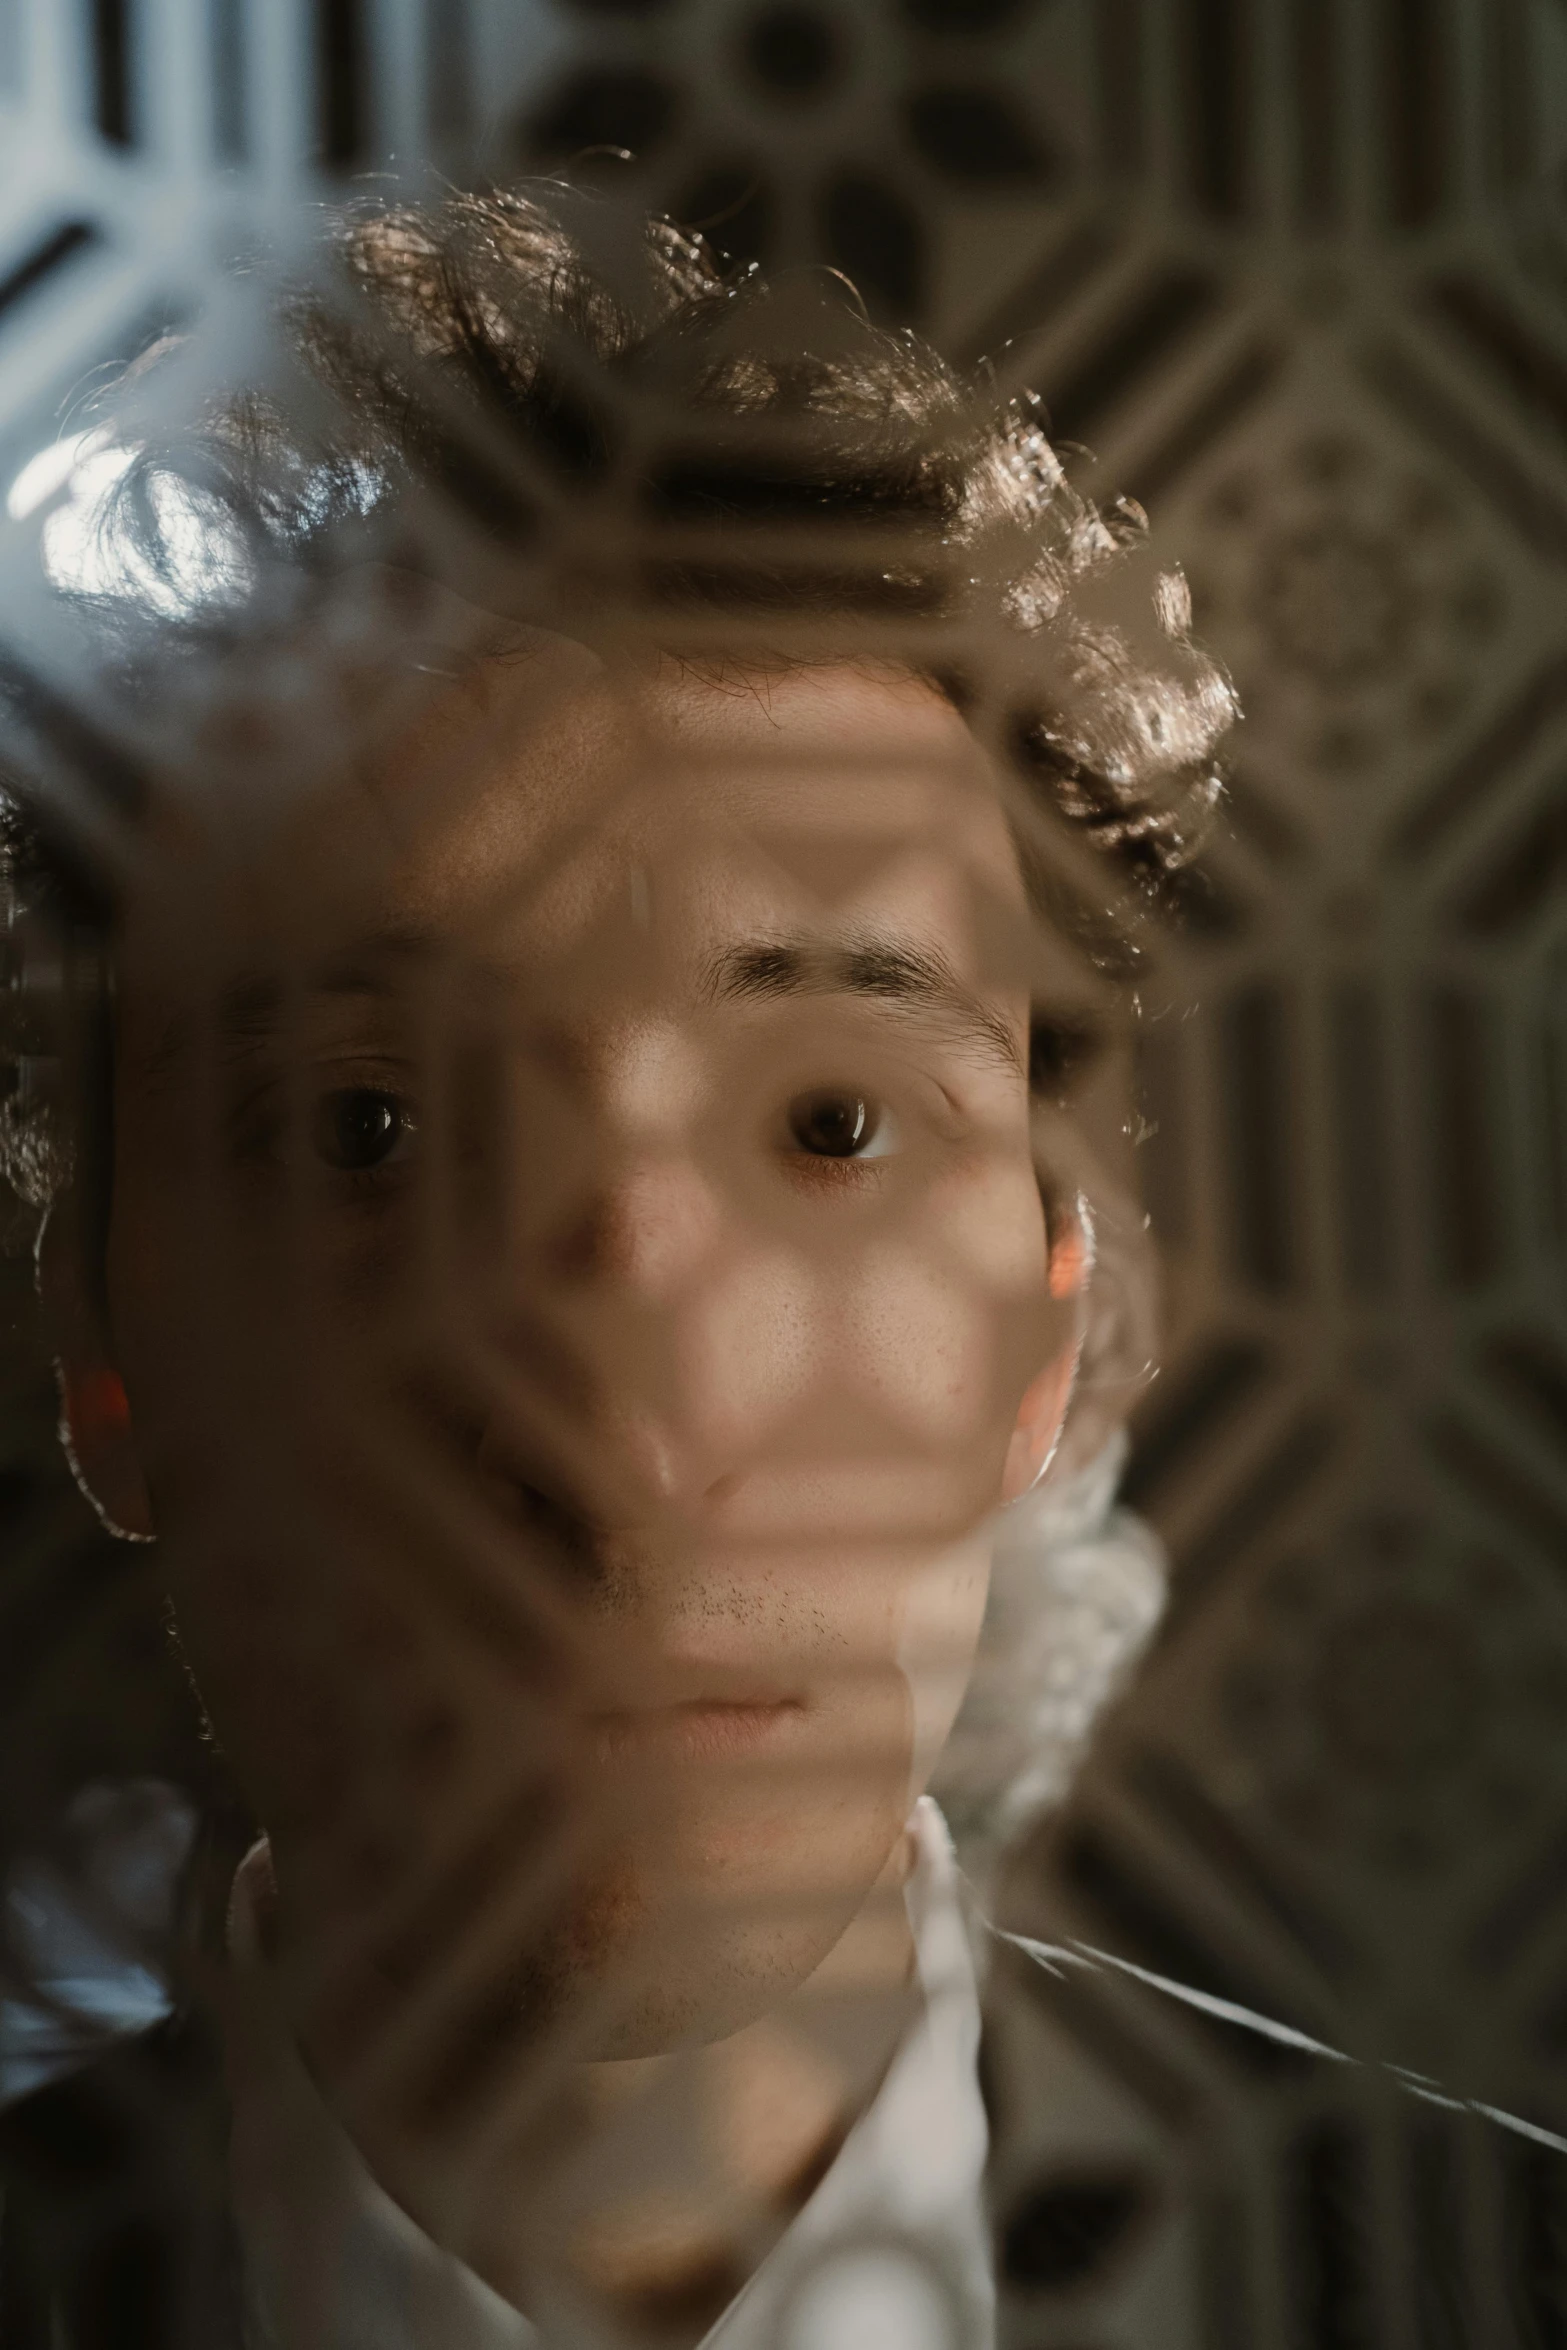 a close up of a person wearing a suit and tie, inspired by Anna Füssli, video art, portrait of timothee chalamet, looking through frosted glass, patterned, armor focus on face